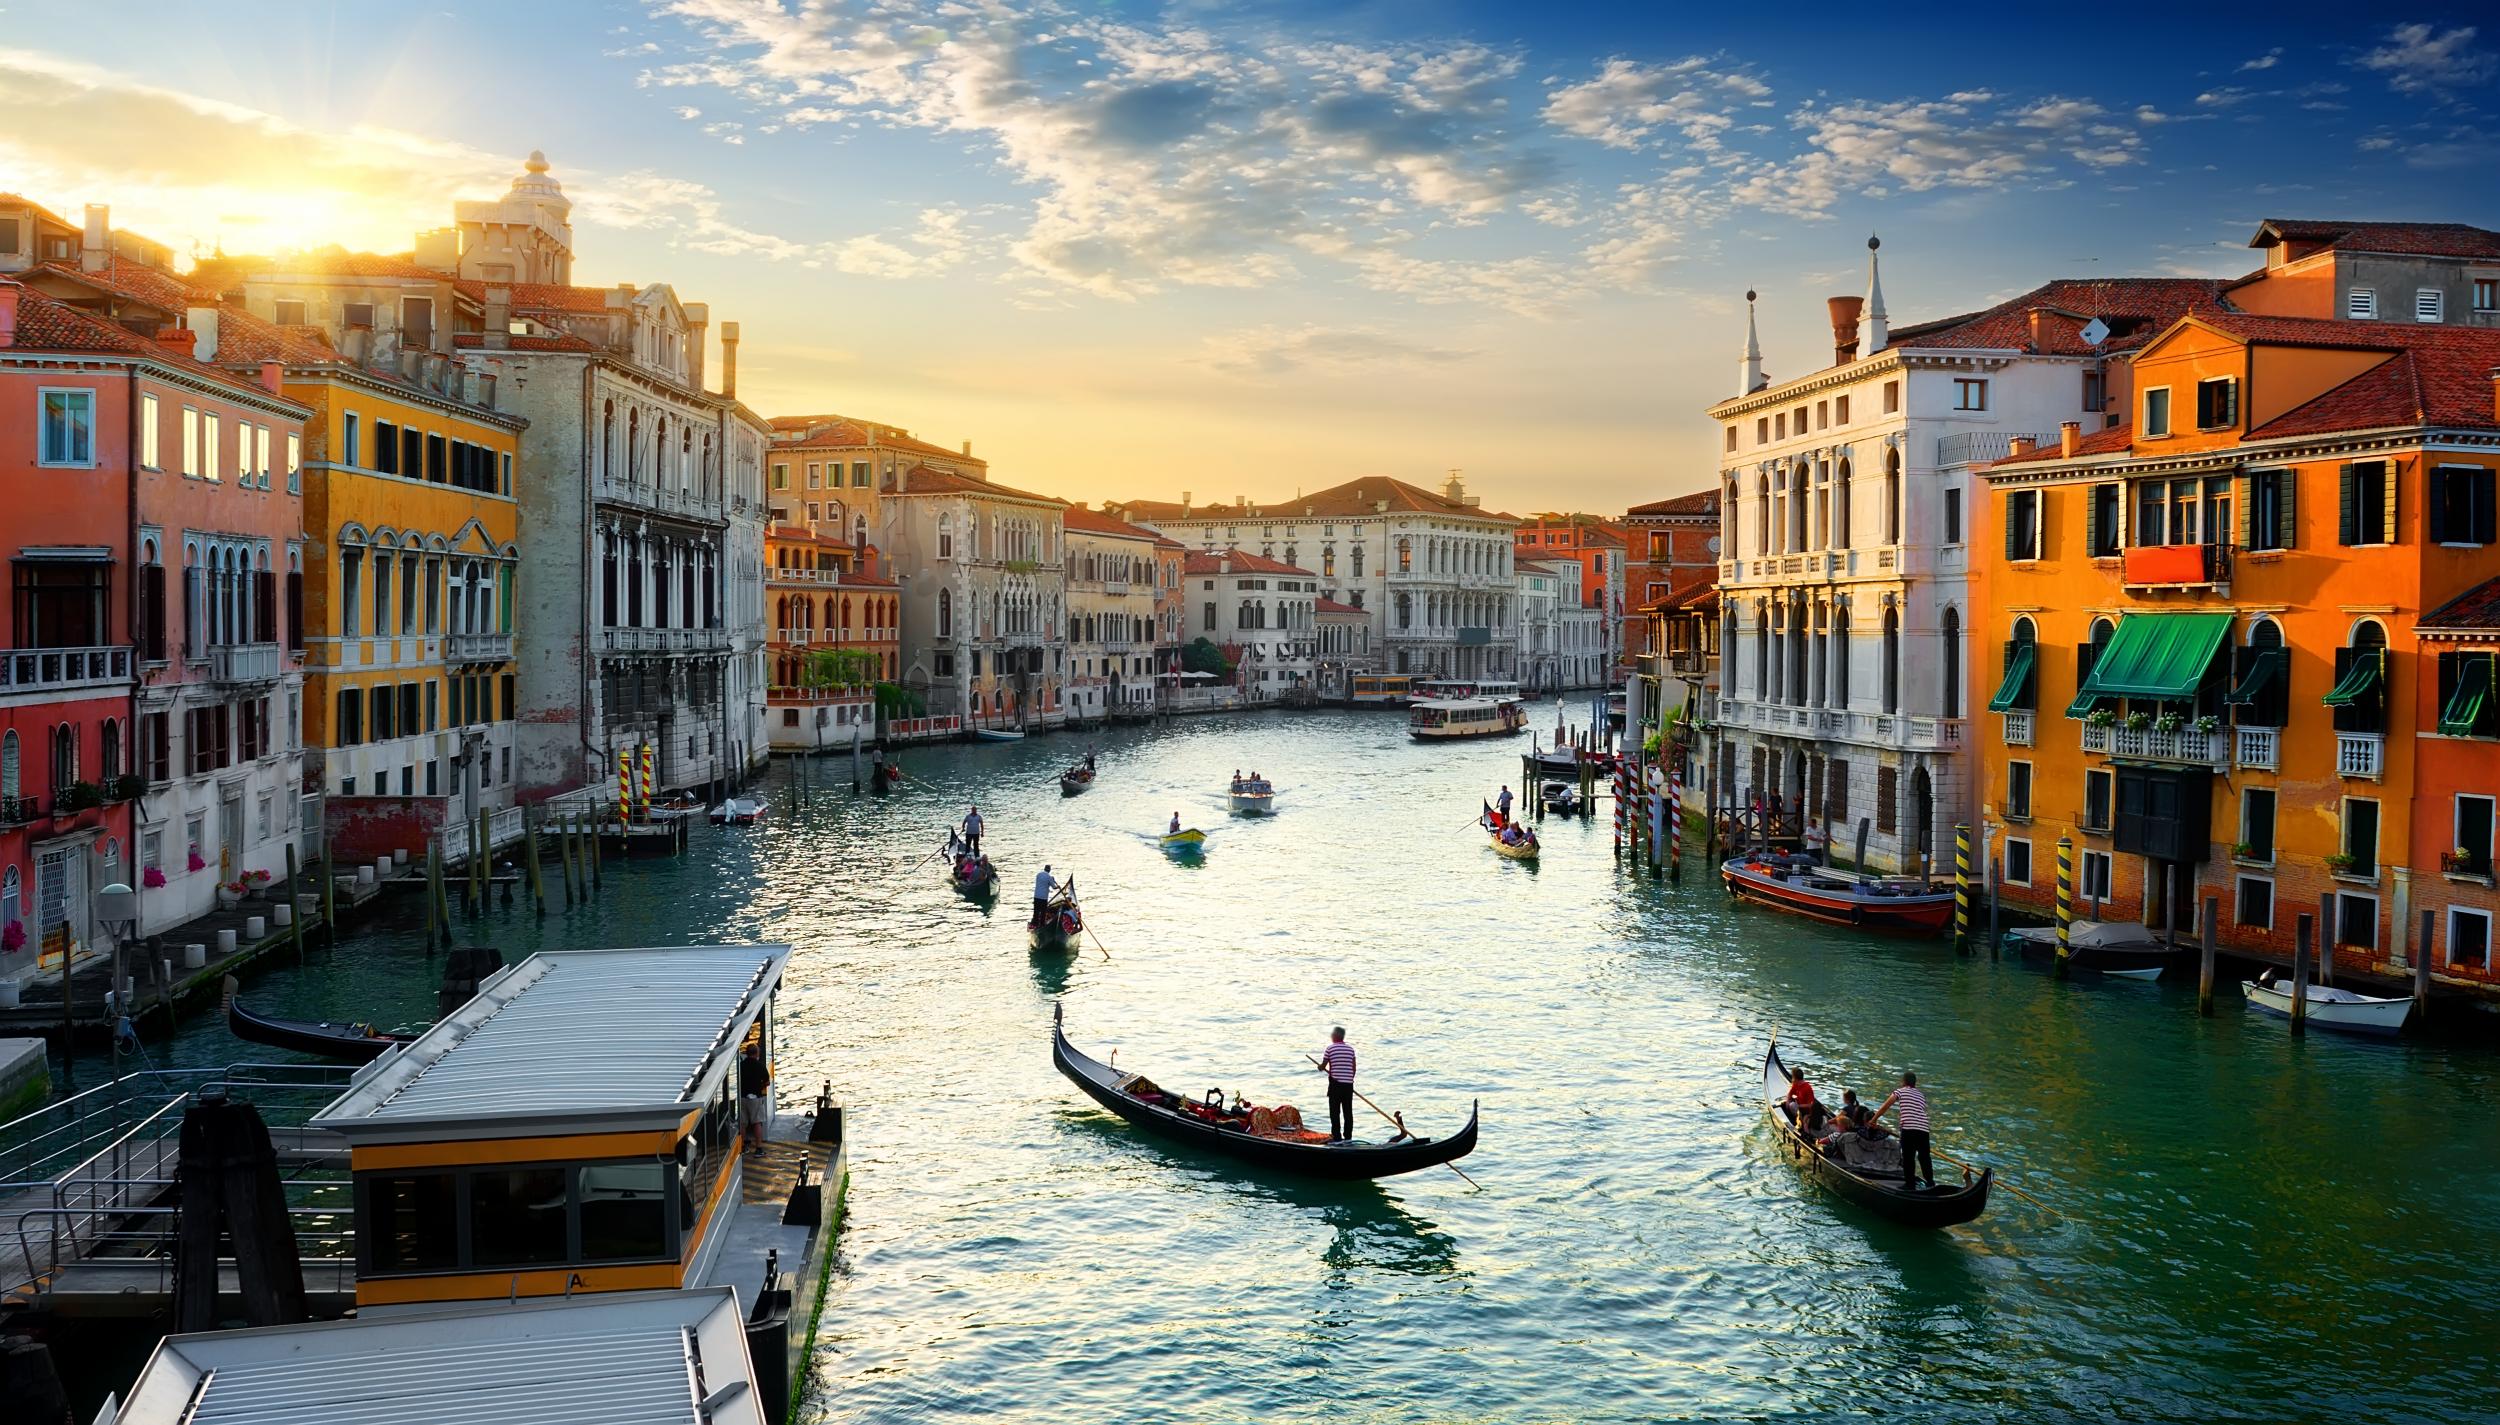 The tax may encourage people to spend a decent tranche of time in Venice during low season, rather than coming just for the day